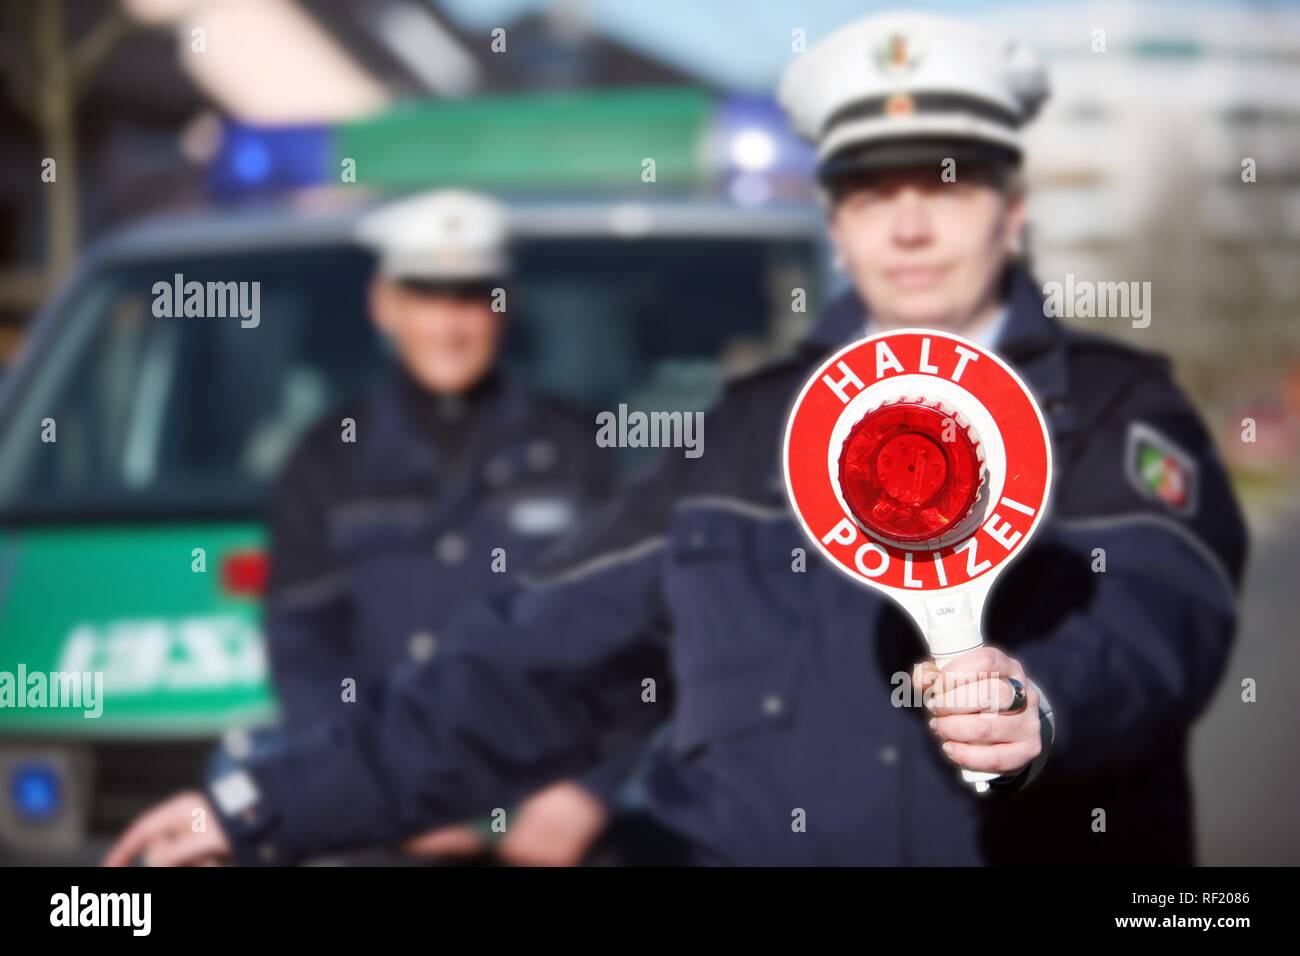 Vehicle spotcheck, police signaling cars to stop and pull over, Mettmann, North Rhine-Westphalia Stock Photo